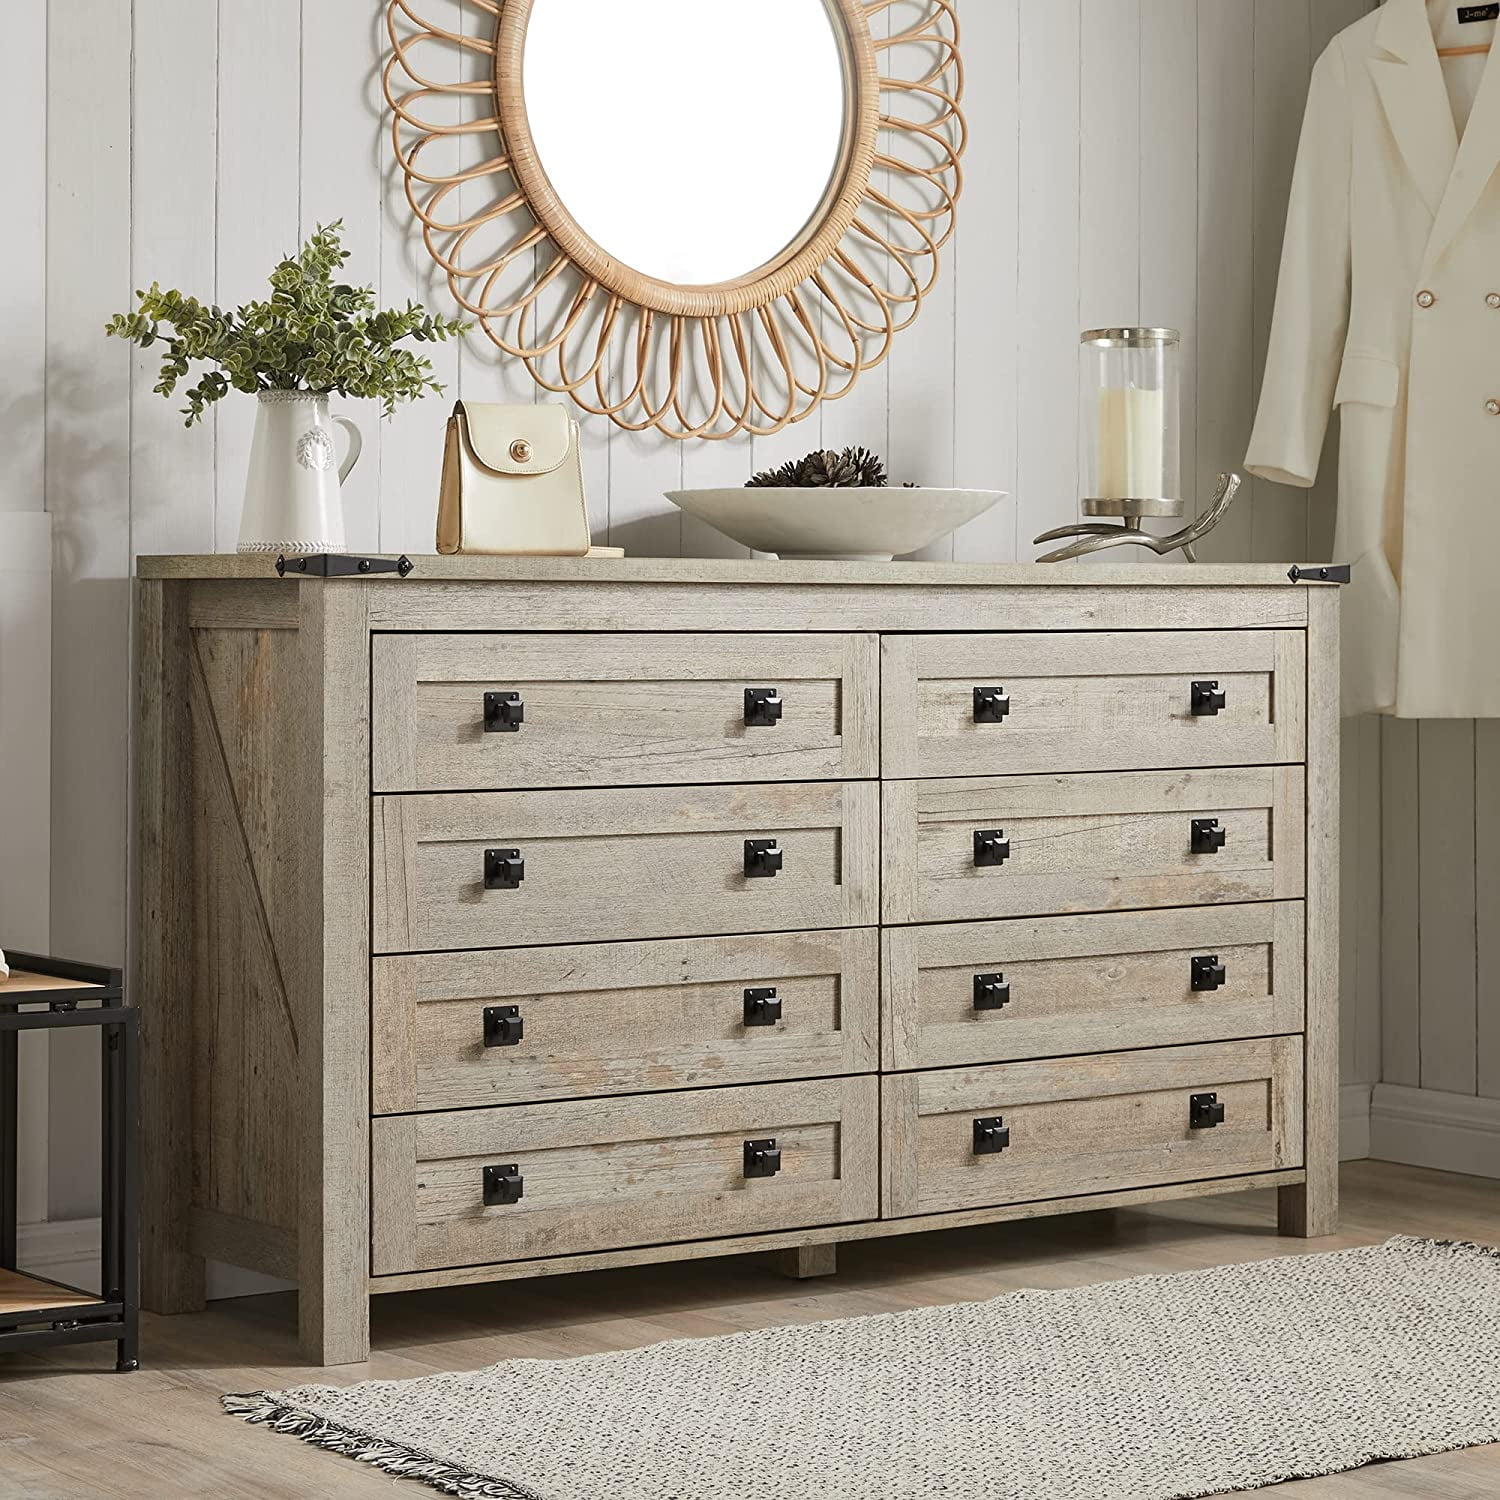 The Jean 60 Barnwood Vanity With Six Drawers